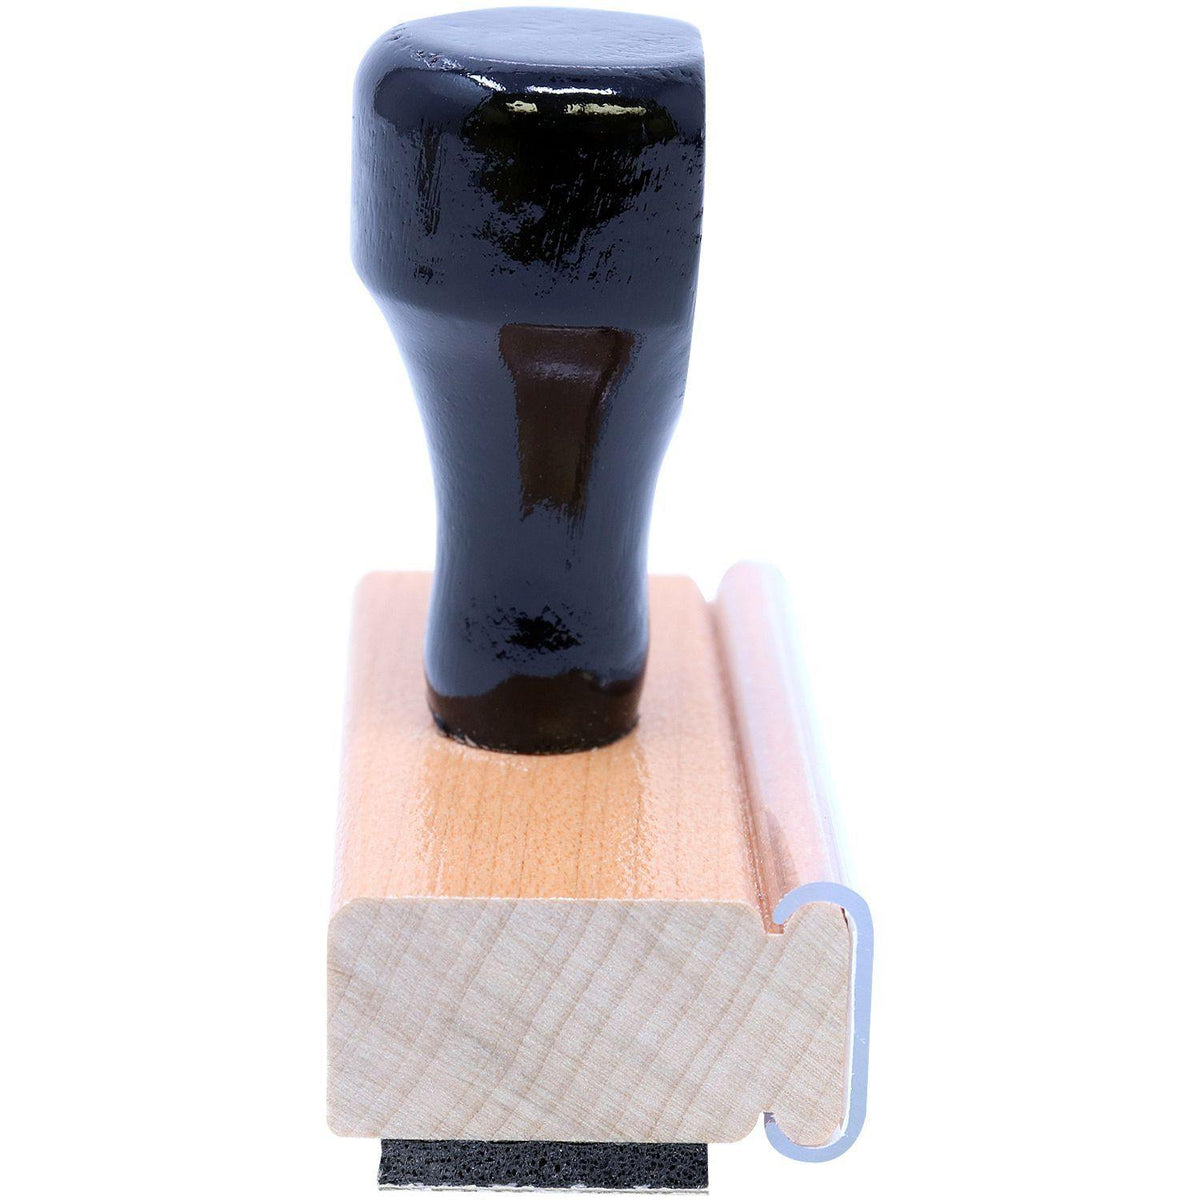 Round Angry Smiley Rubber Stamp - Engineer Seal Stamps - Brand_Acorn, Impression Size_Small, Stamp Type_Regular Stamp, Type of Use_General, Type of Use_Teacher